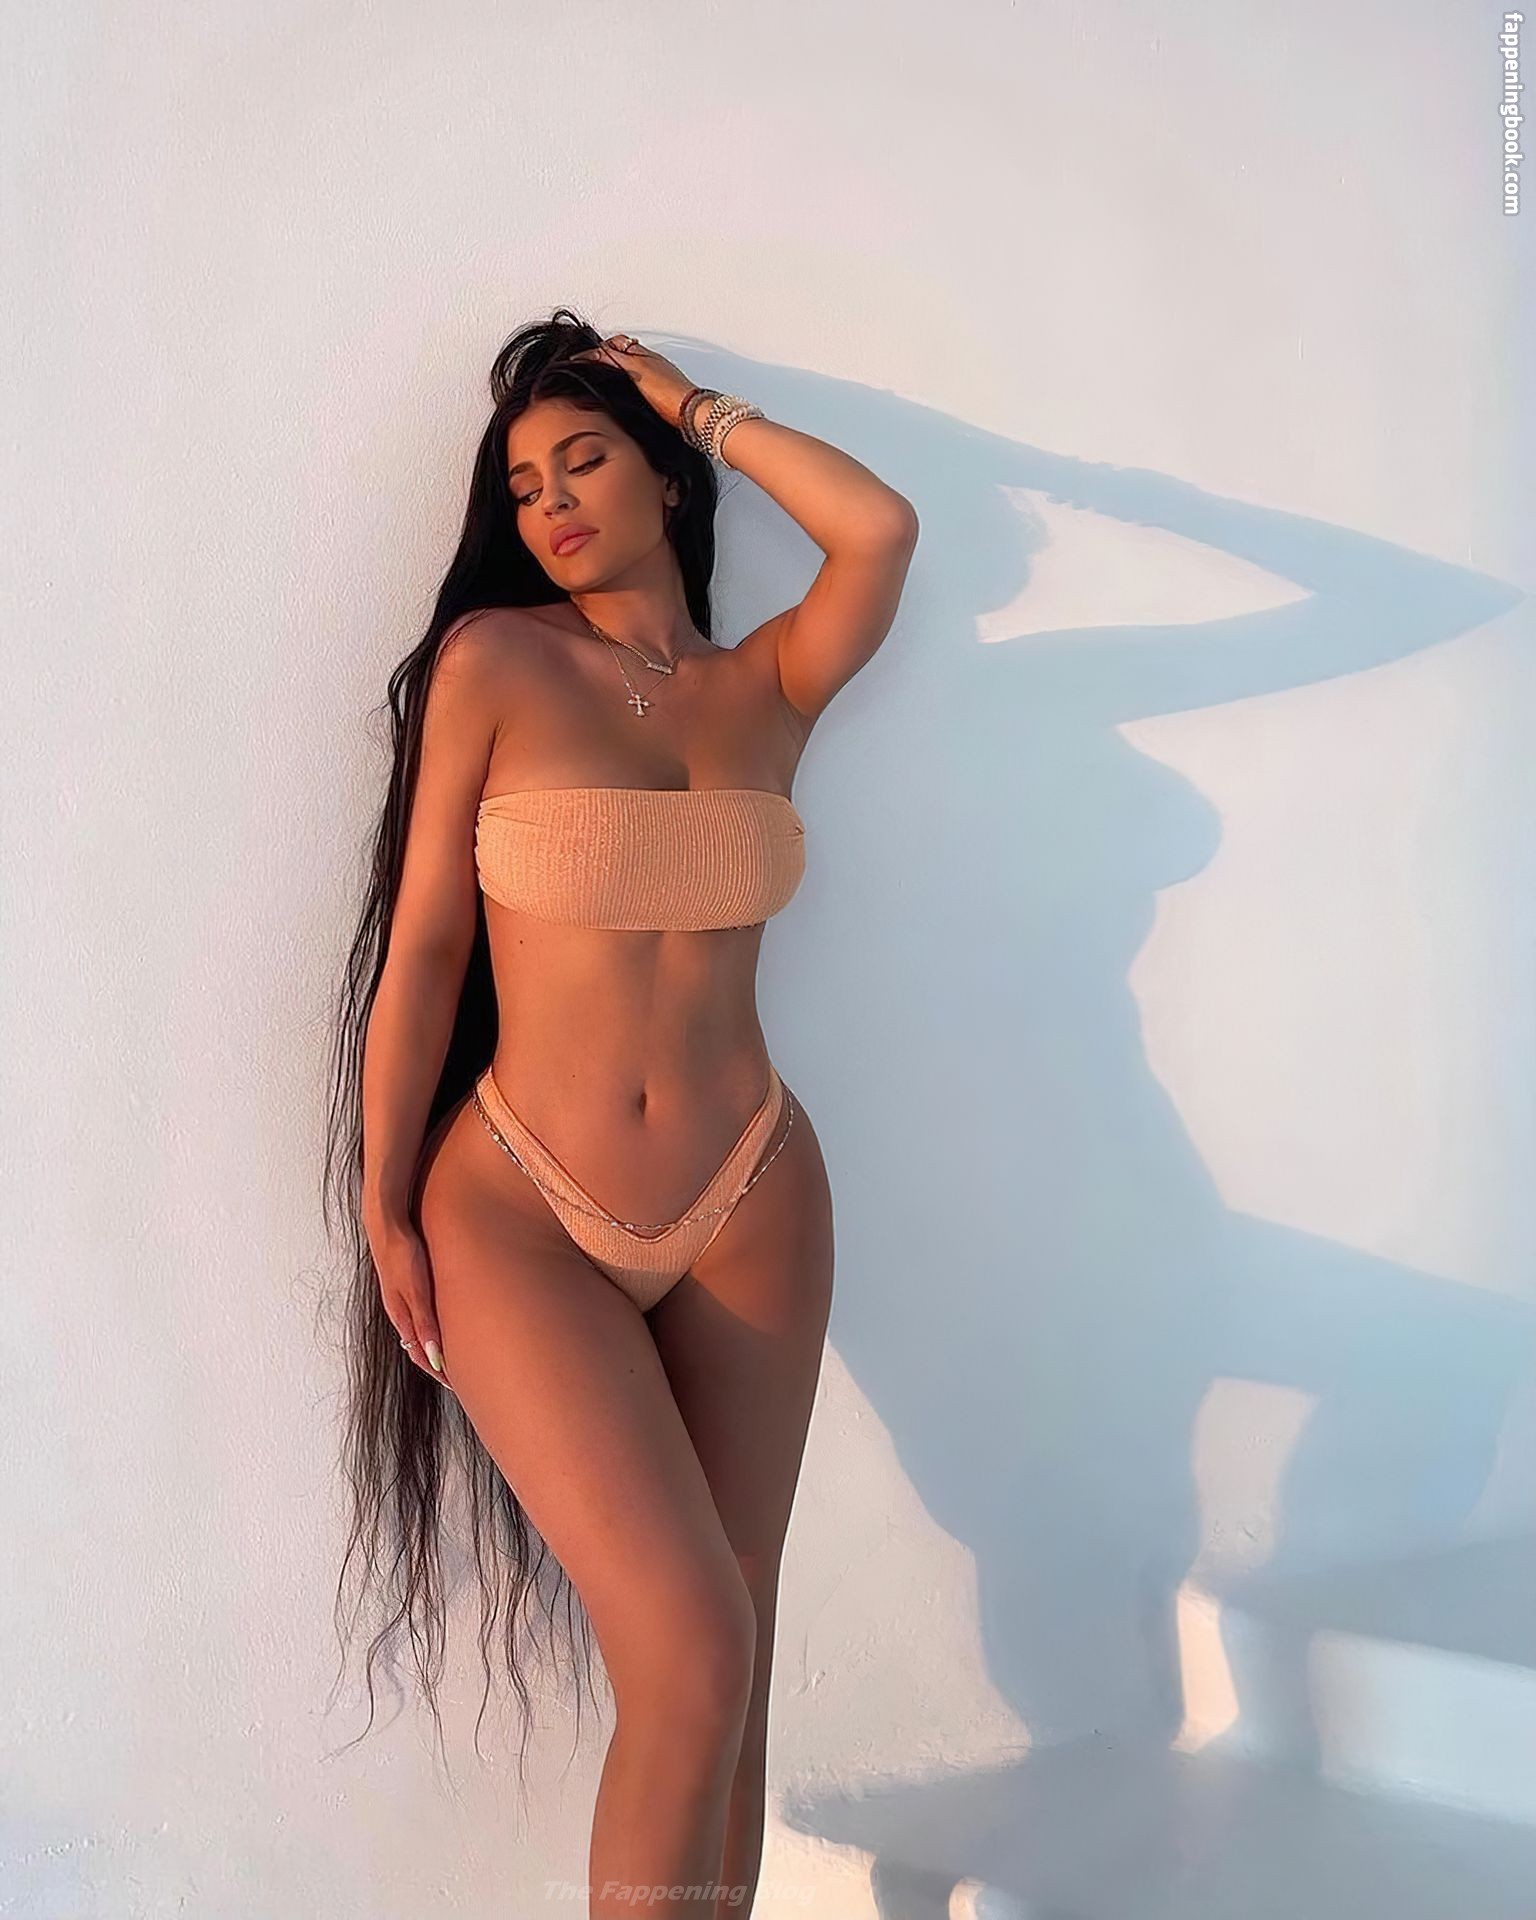 Kylie Jenner Looks Hot in a Bikini | TheFappening!